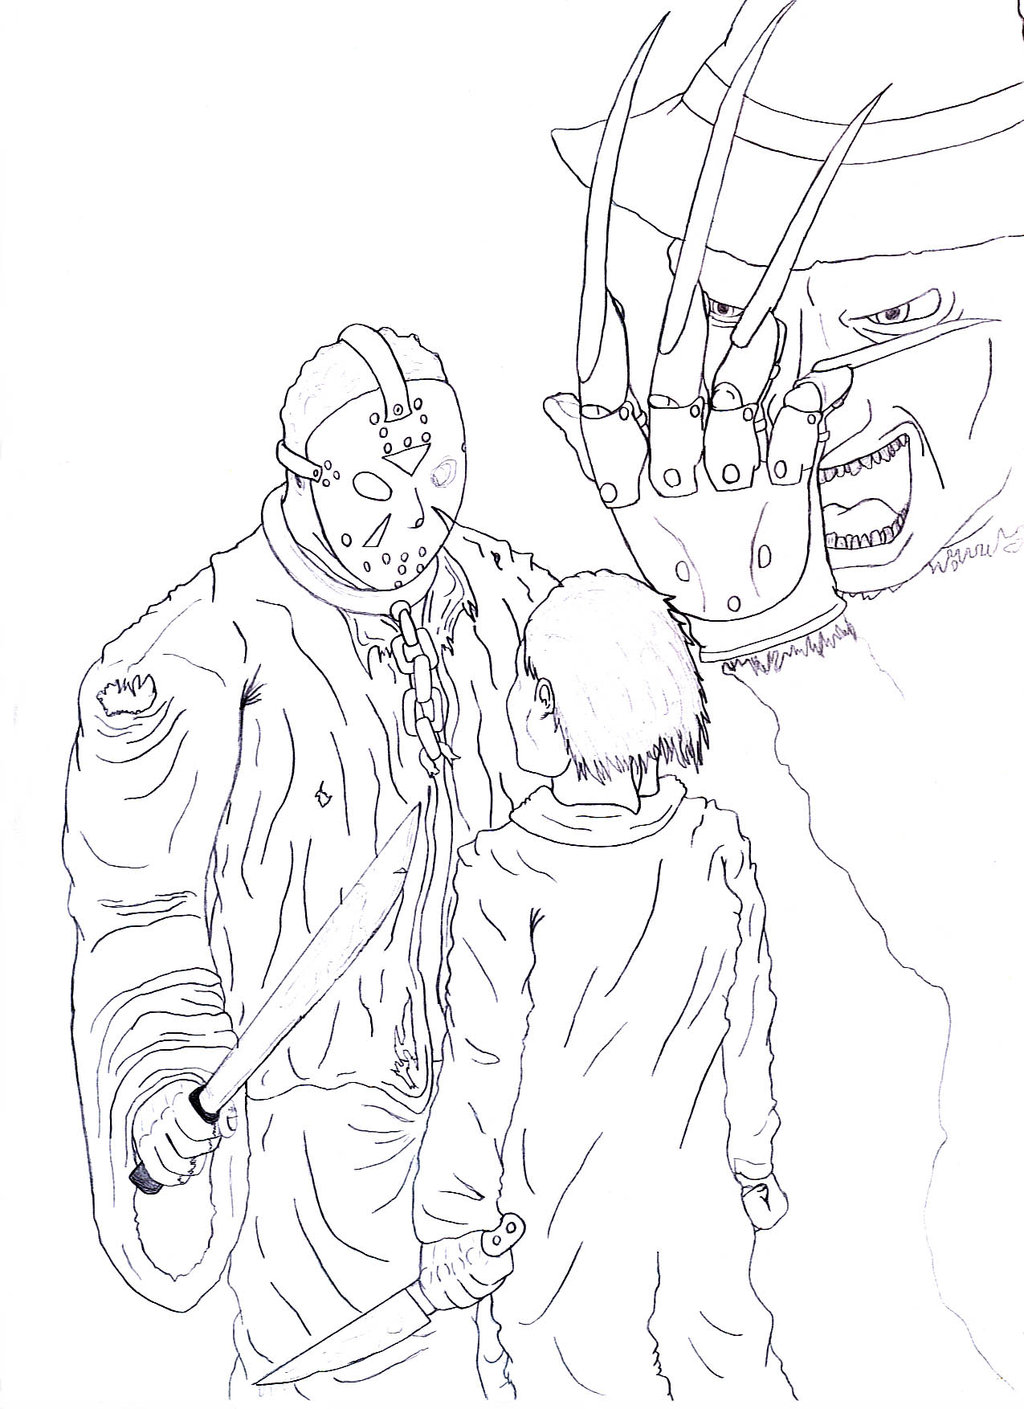 Found. coloring page images for 'Jason'. 